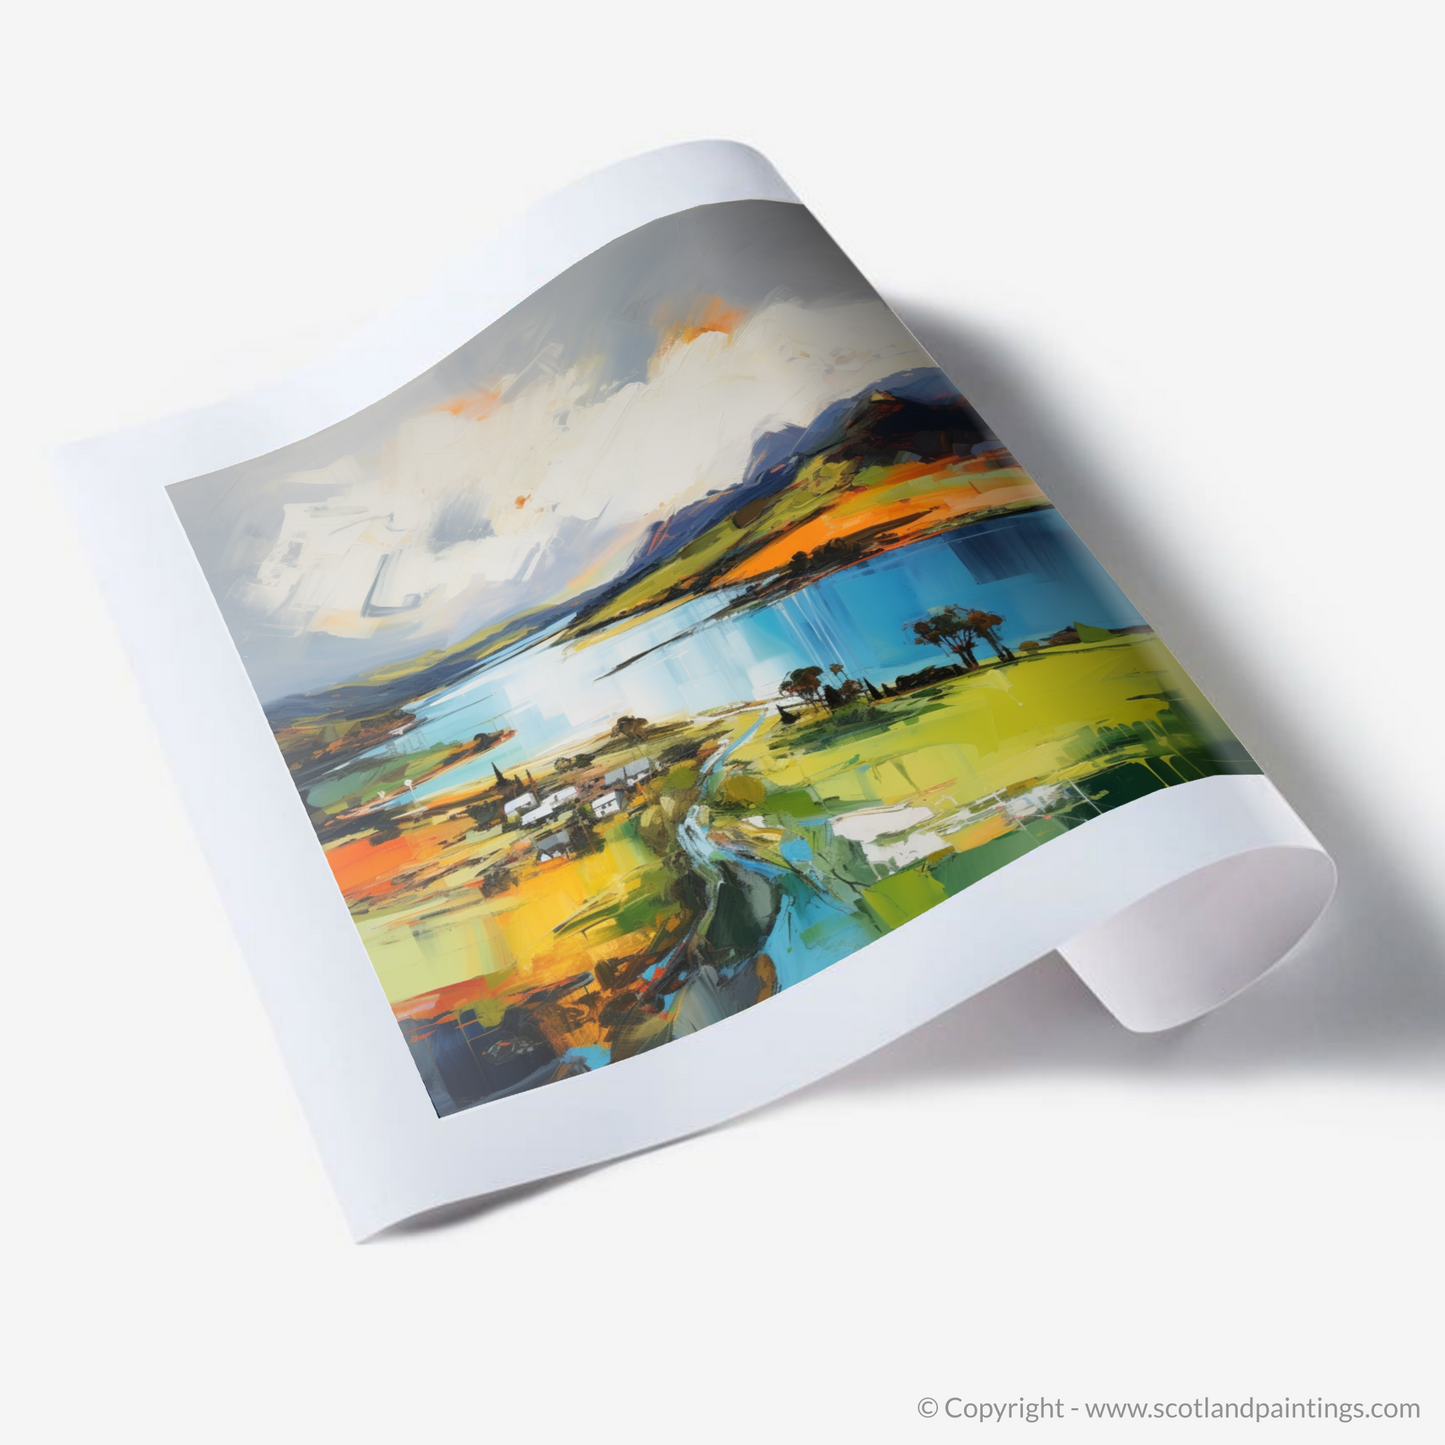 Art Print of Loch Leven, Perth and Kinross